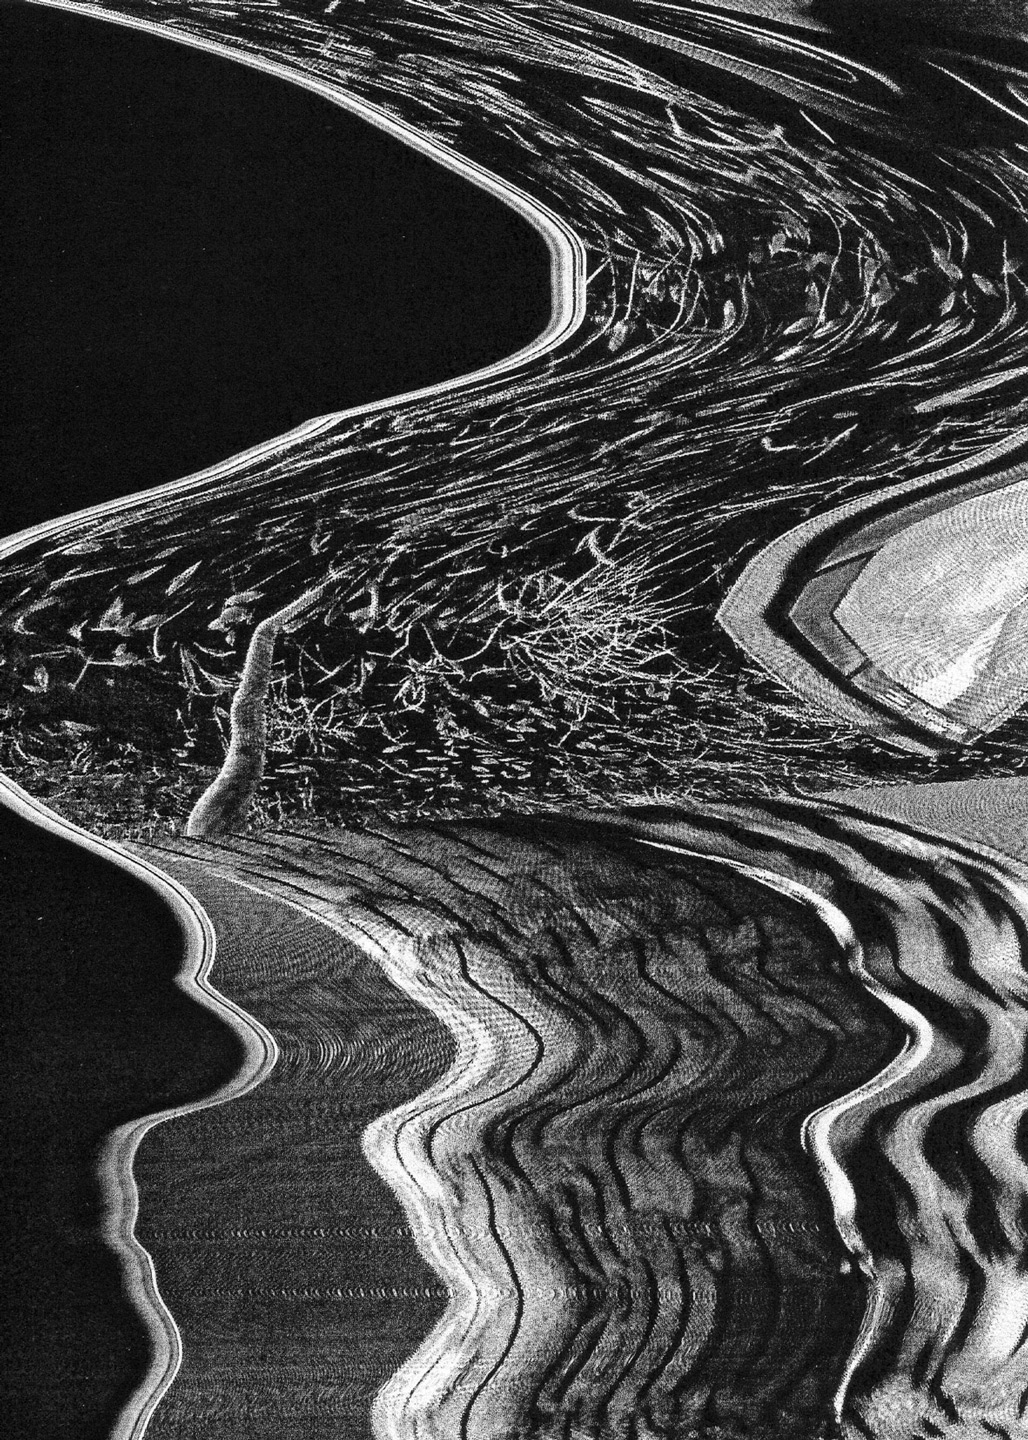 The image showcases a scanograph and xerox art composition depicting a distorted and warped representation of natural elements. The abstract artwork creates an unsettling effect, highlighting the fragility and vulnerability of nature. The black-and-white composition features wavy shapes and glitches that add to its aesthetic.